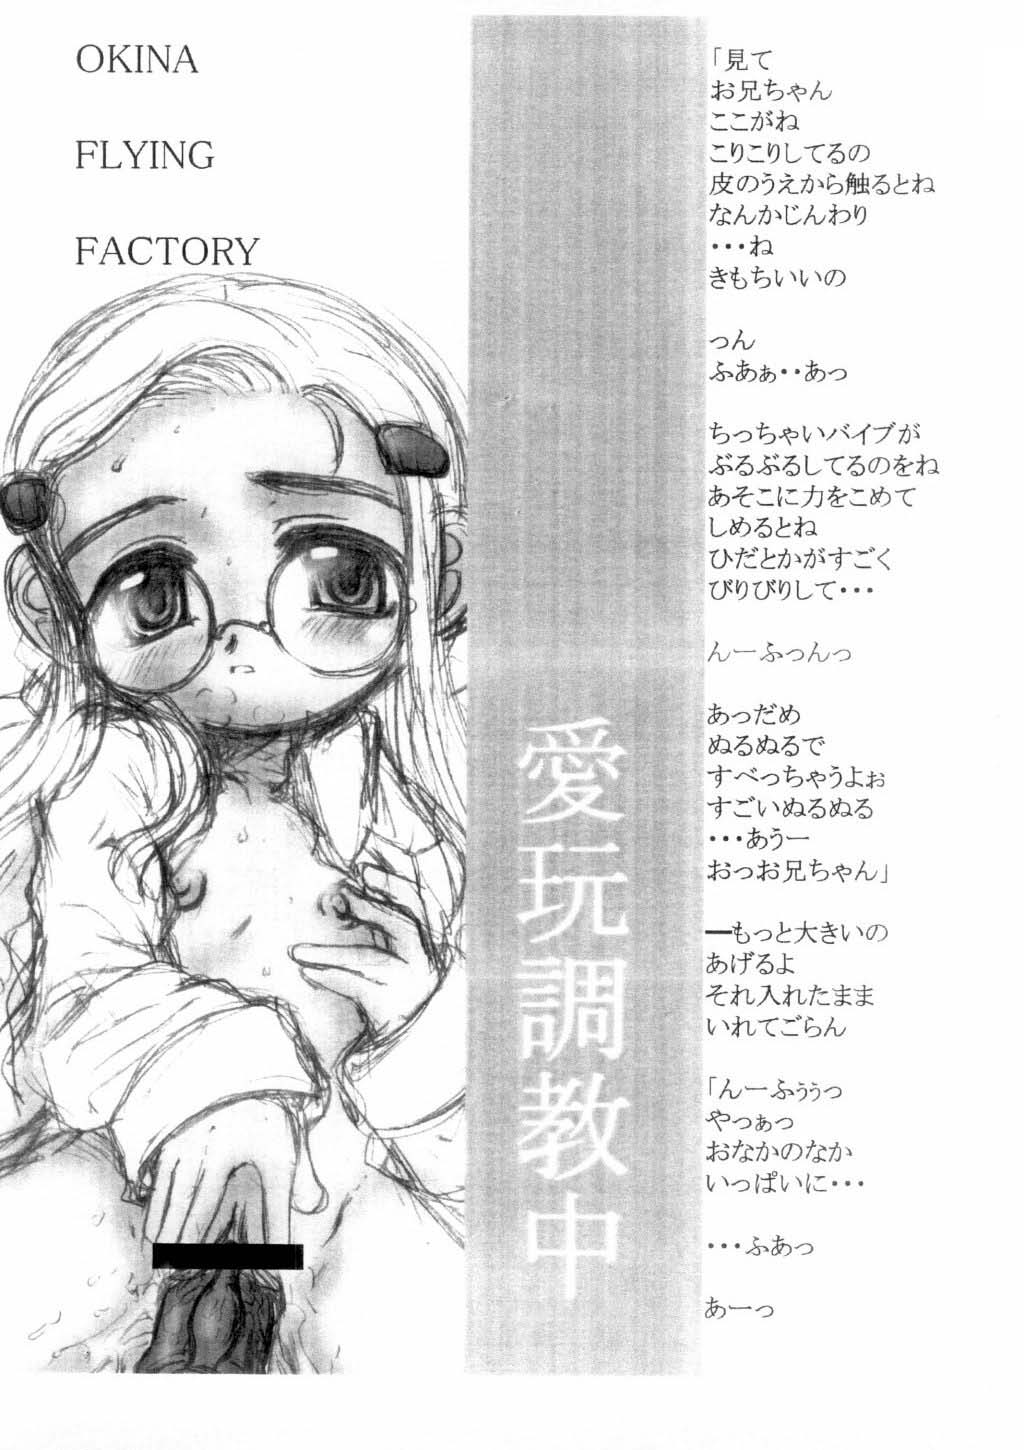 [OKINA FLYING FACTORY] OFF C62 Copybook page 8 full